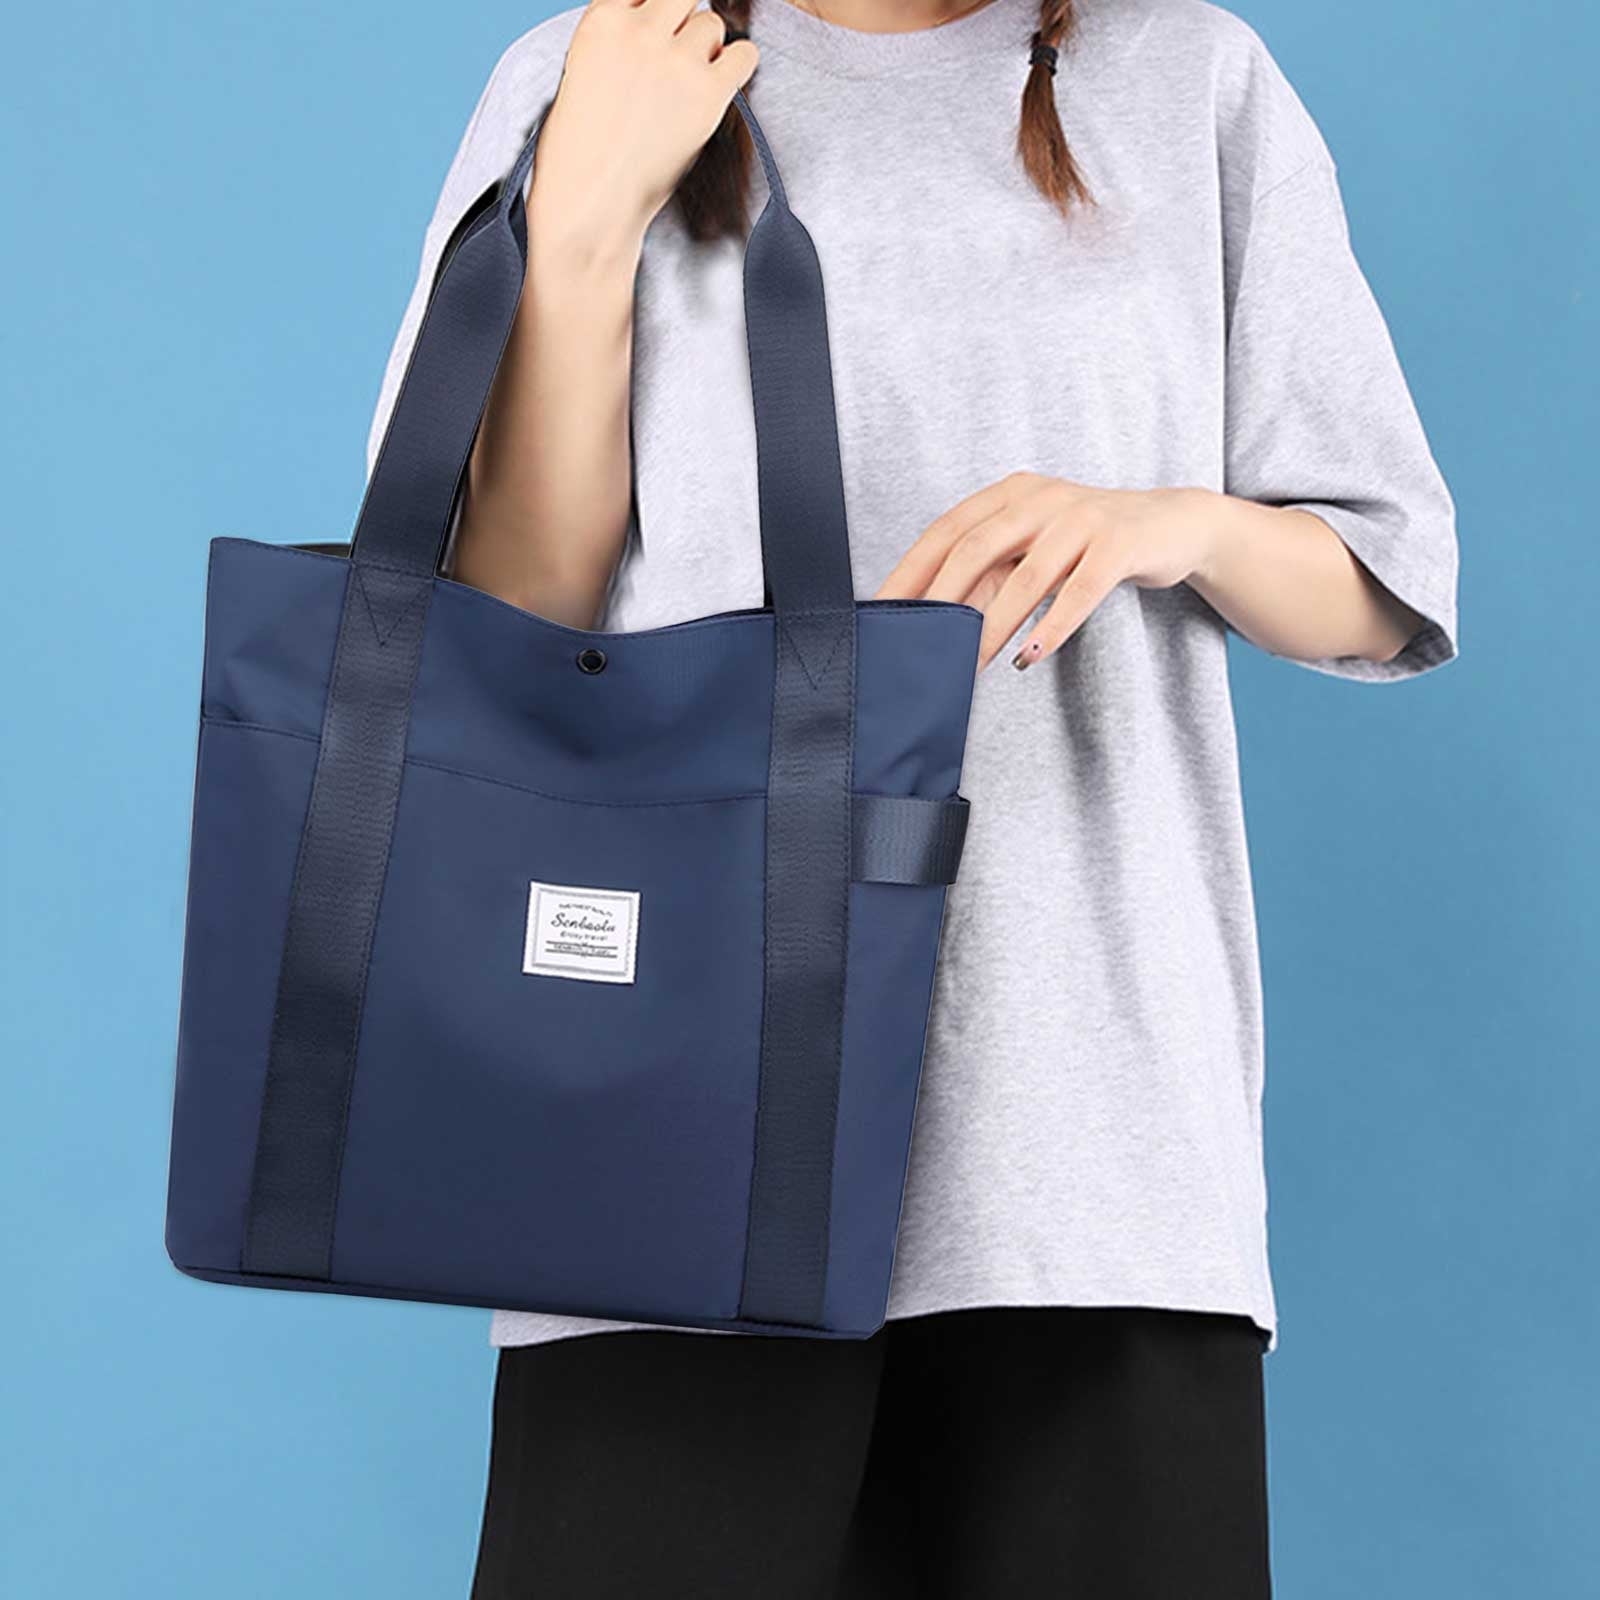 Tuobarr Tote Bag for Women, Women Tote Bag Large Shoulder Bag, Handbags for  Women, with Yoga Mat Buckle For Gym, Work, School Dark Blue 